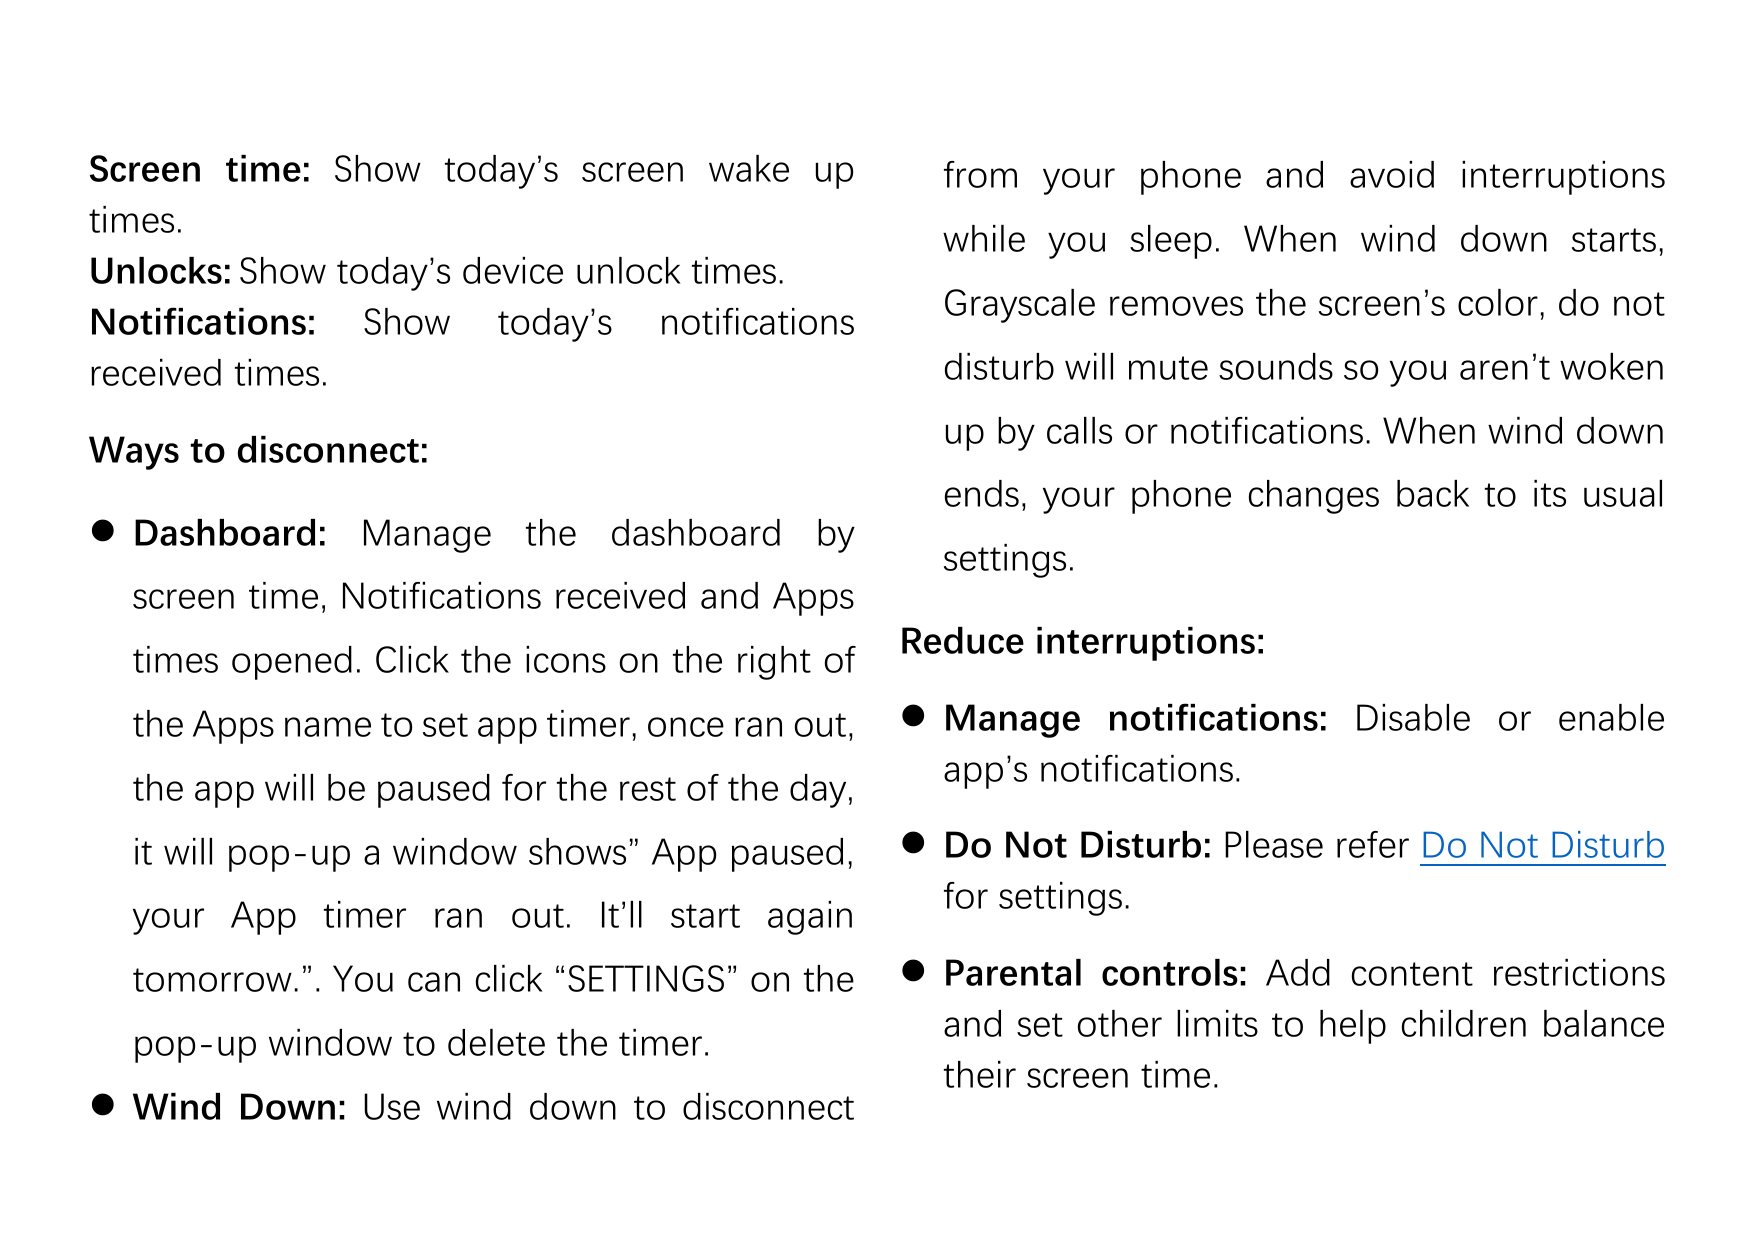 Screen time: Show today’s screen wake uptimes.Unlocks: Show today’s device unlock times.Notifications: Show today’s notification